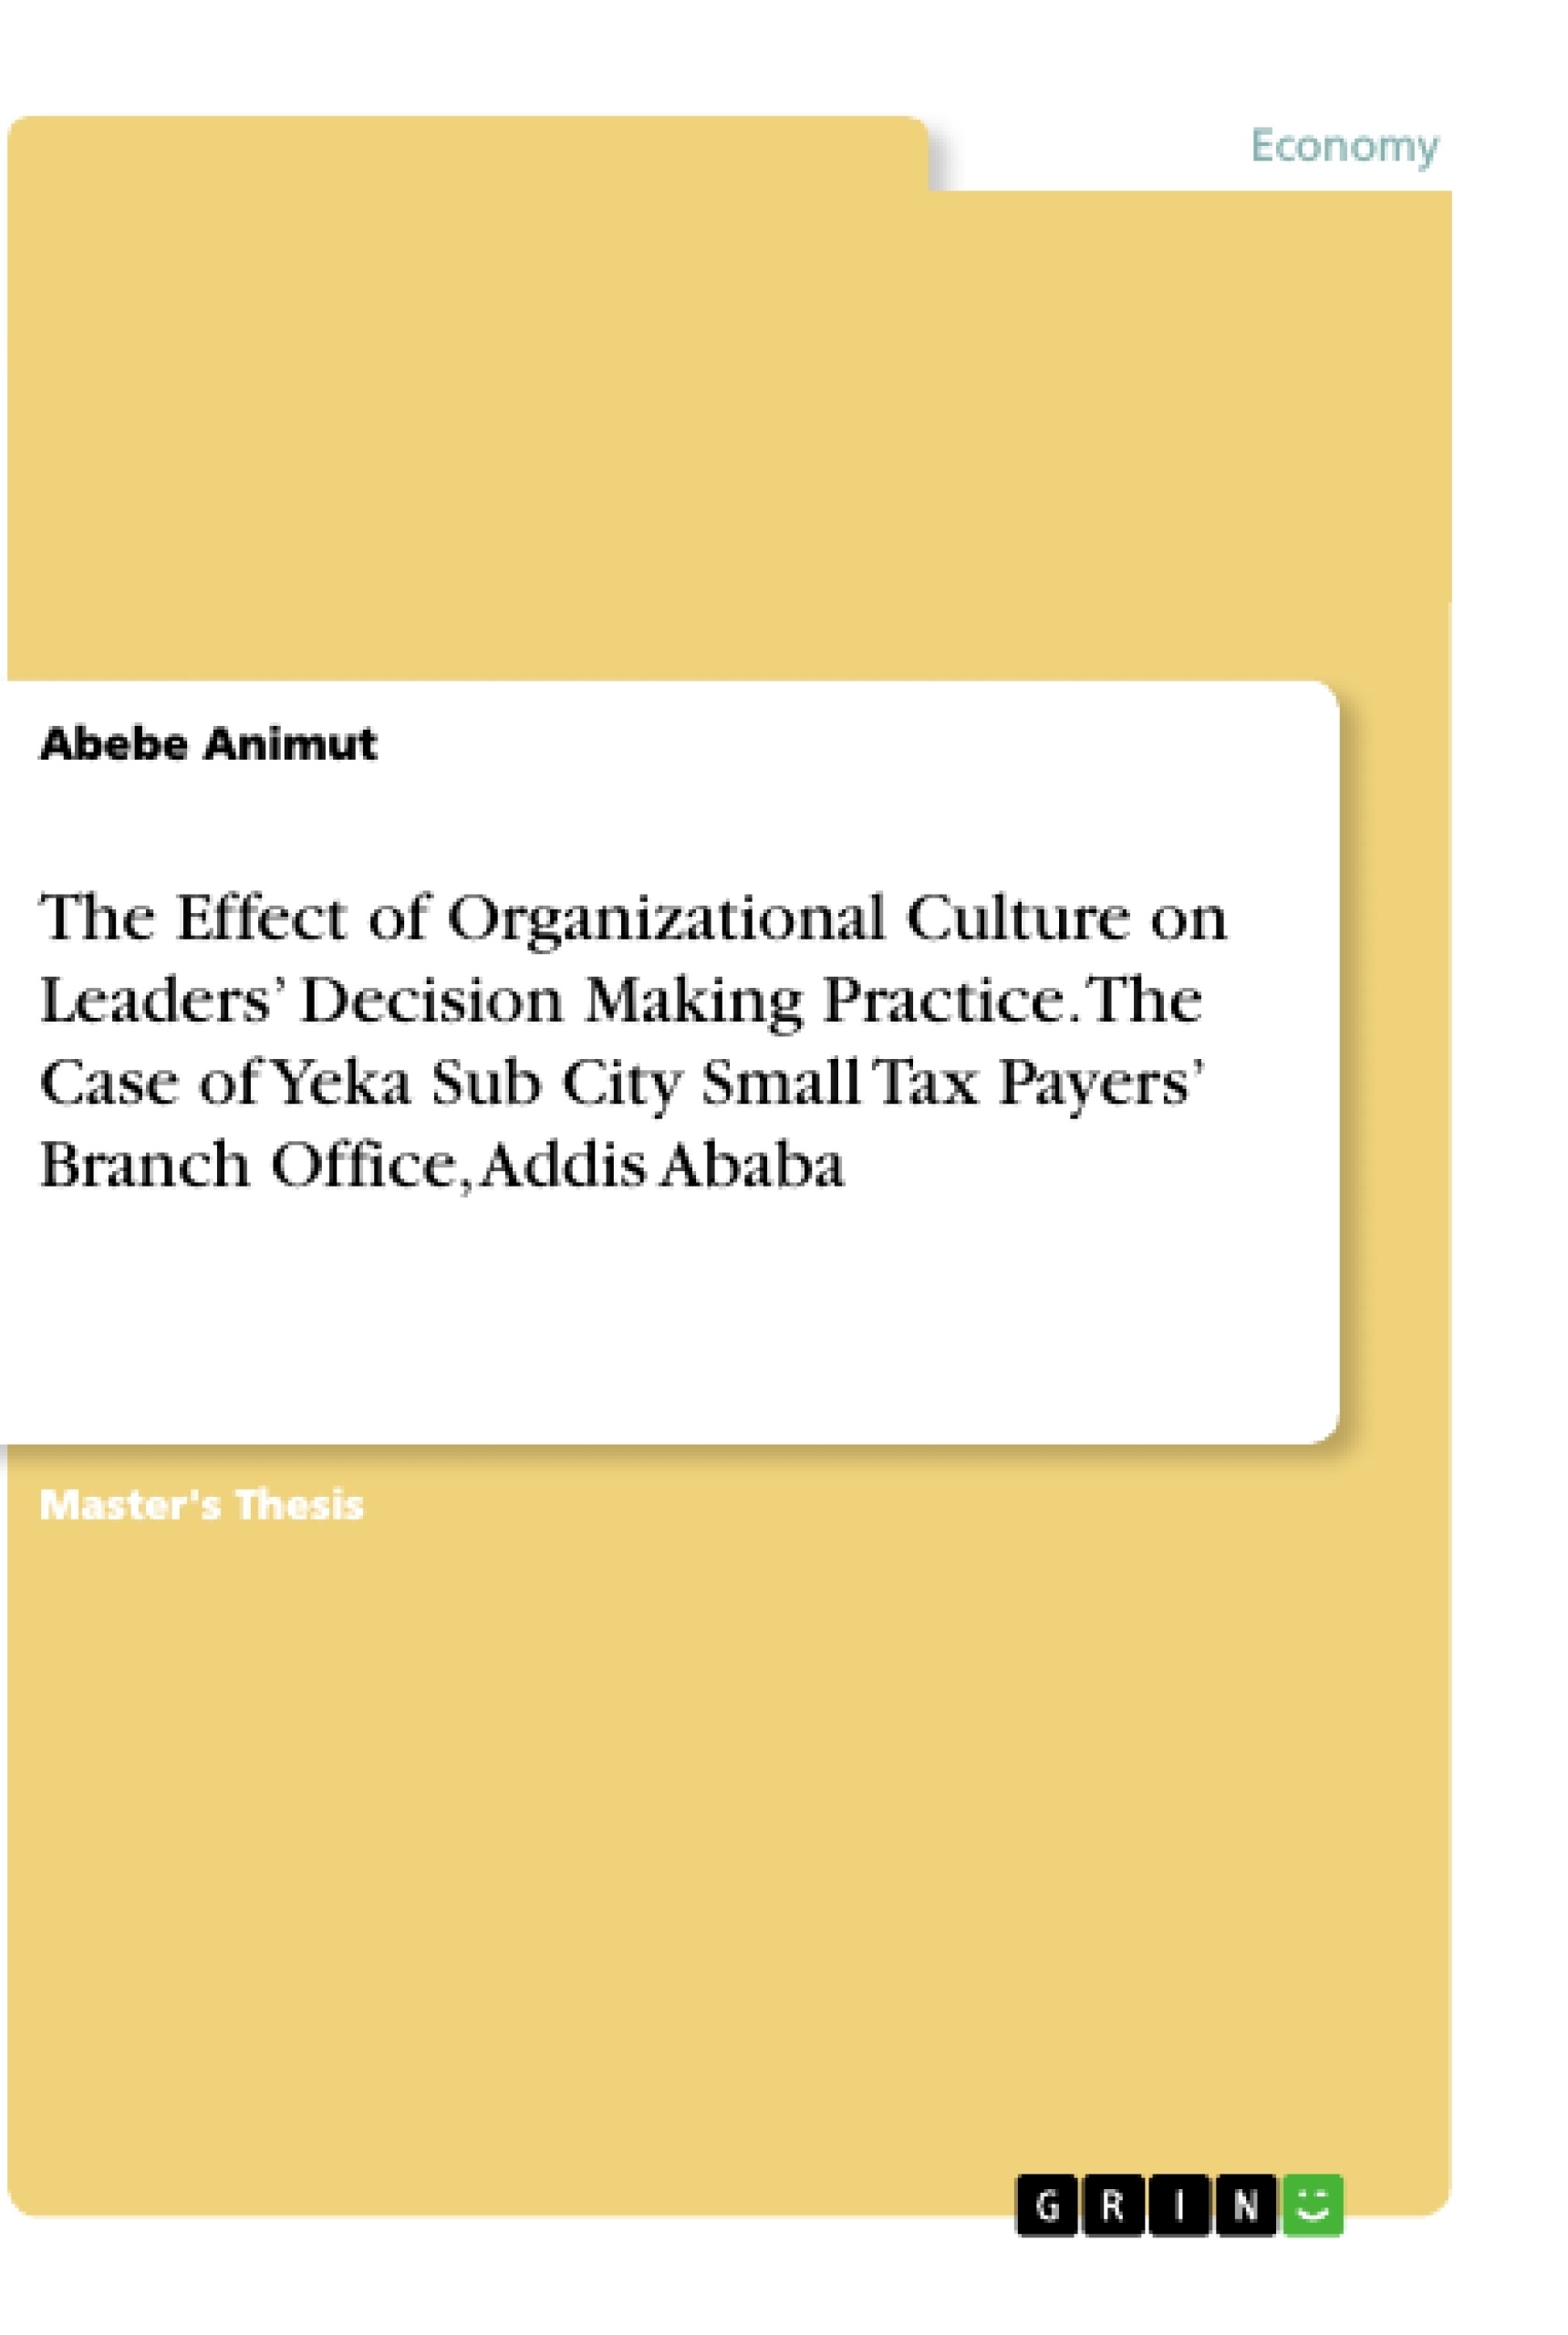 Title: The Effect of Organizational Culture on Leaders’ Decision Making Practice. The Case of Yeka Sub City Small Tax Payers’ Branch Office, Addis Ababa